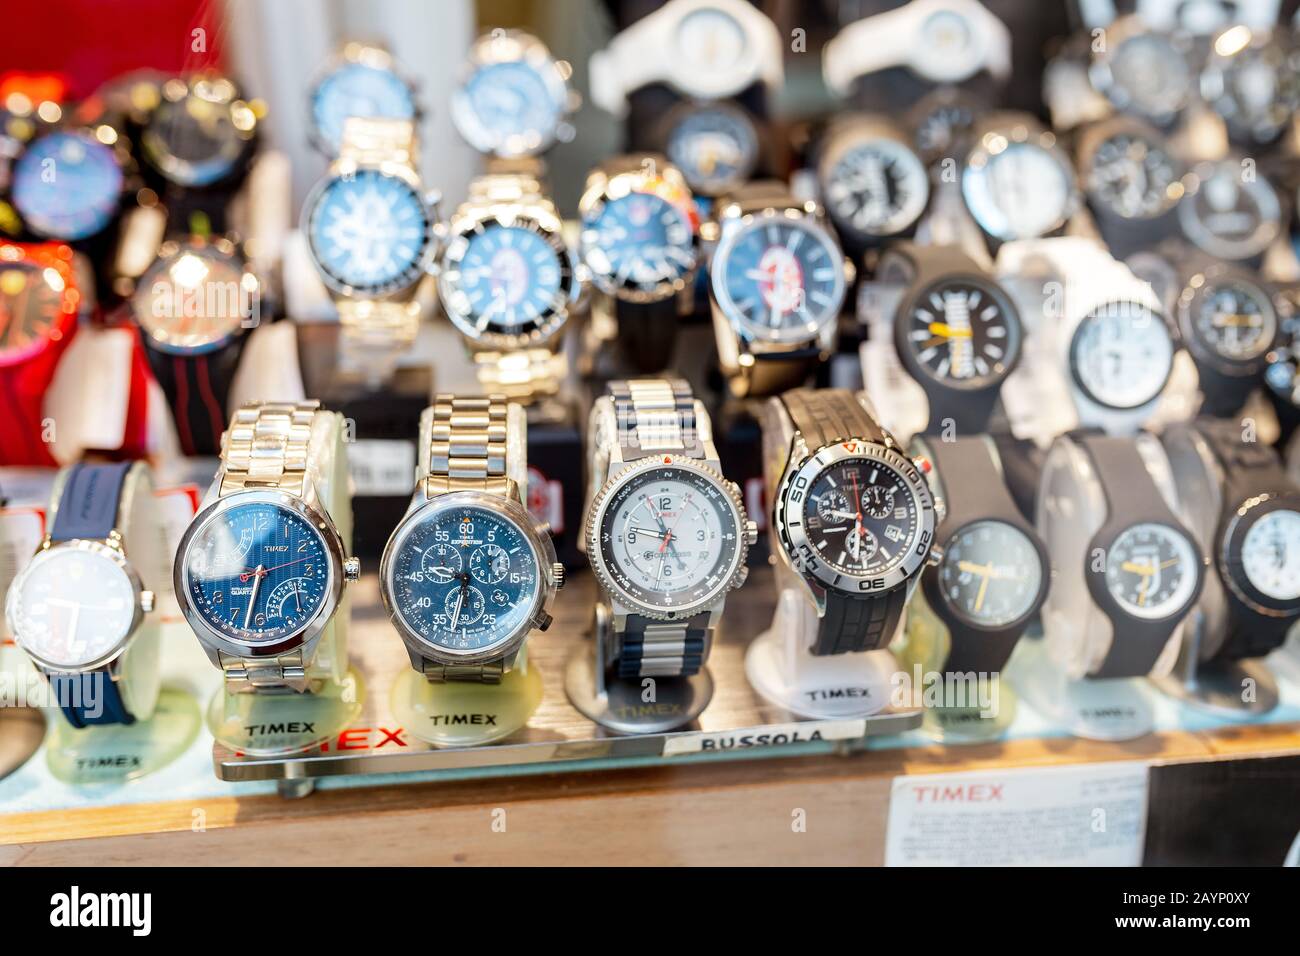 23 OCTOBER 2018, VENICE, ITALY: Timex Watches For Sale In Shop Stock Photo  - Alamy